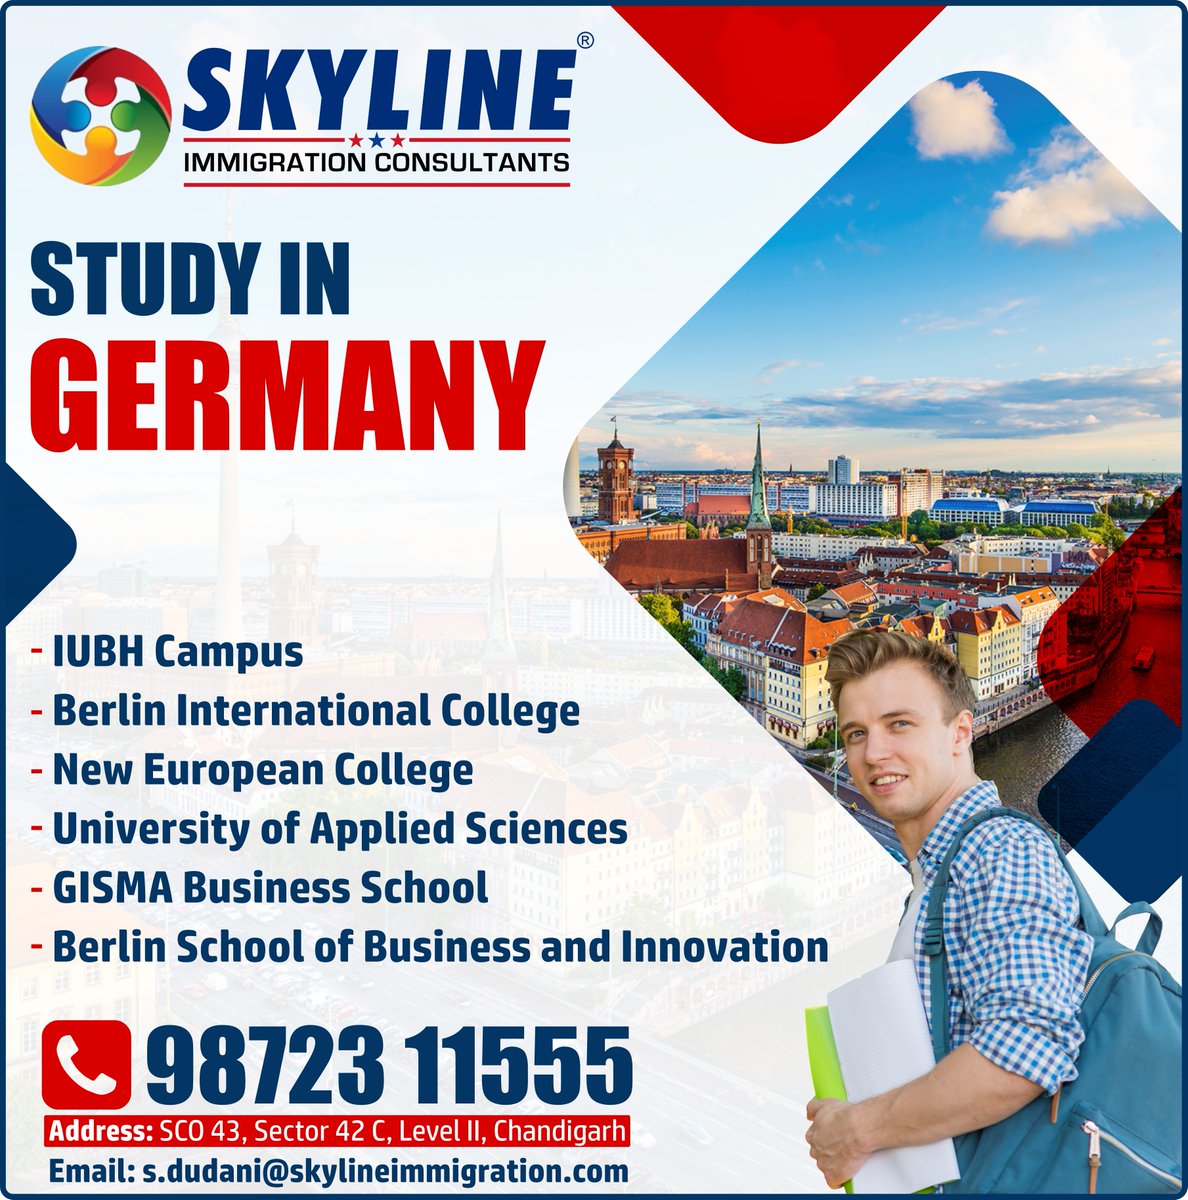 👉 Study in Germany
👉 With and Without IELTS
👉 Talk To Our Experts: +91- 98723 11555, 9023488558

Want to know about Benefits from studying in Germany?
Visit --> skylineimmigration.com/study-in-Germa…

#studyinGermany #Overseas #EducationInGermany #education #Germanystudyvisa #Student